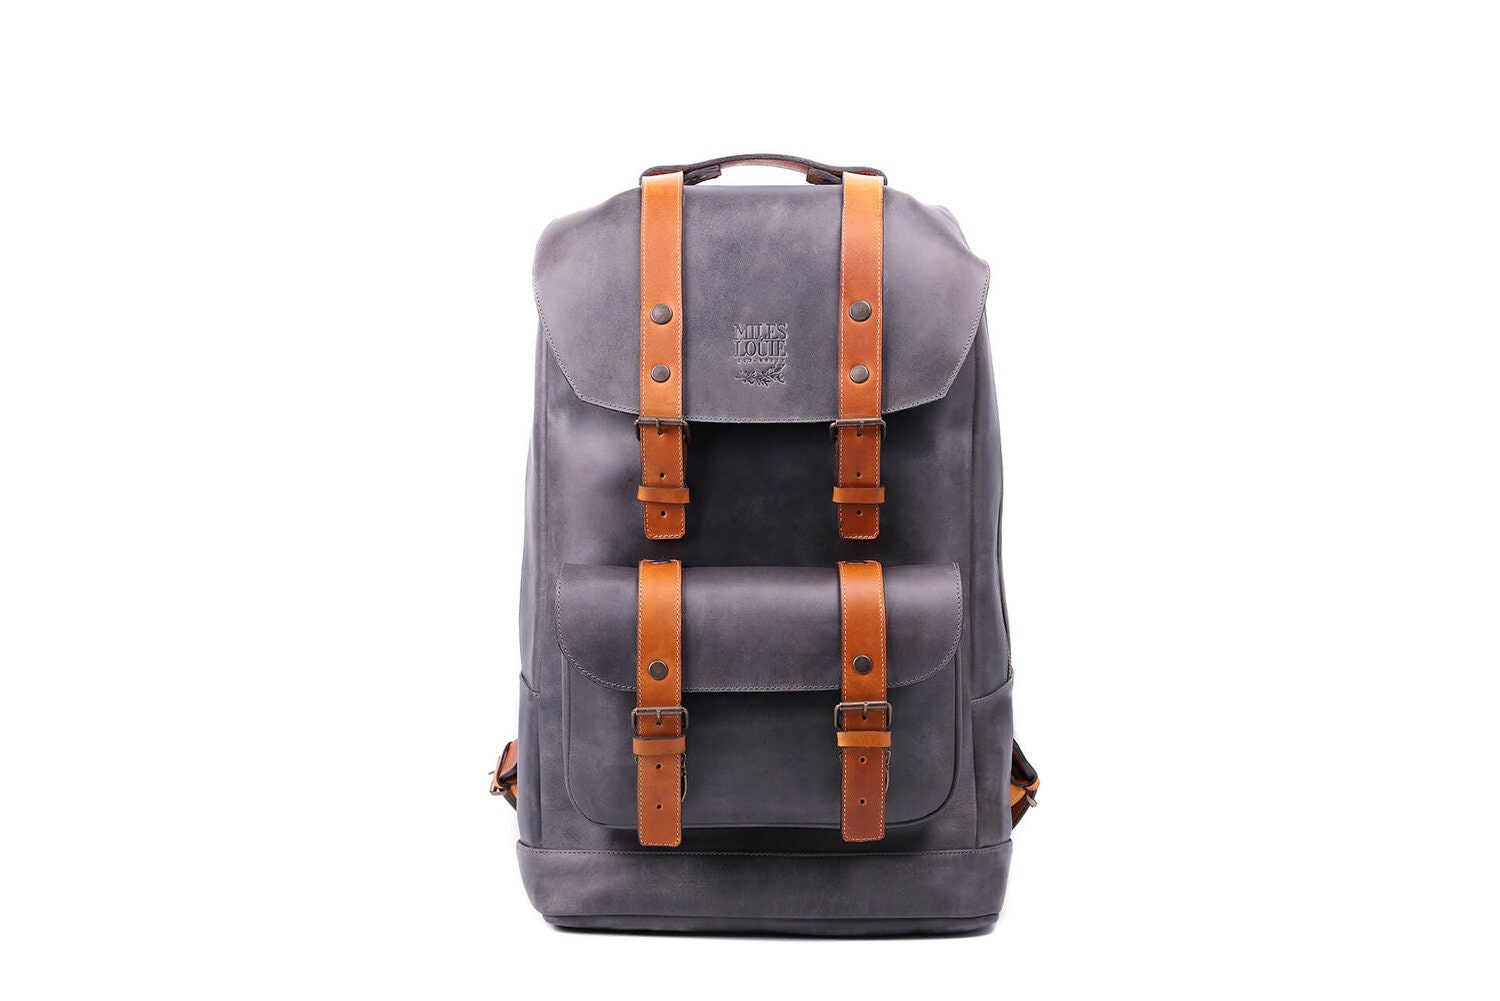 Gray Leather Laptop Backpack Work Book Bag 